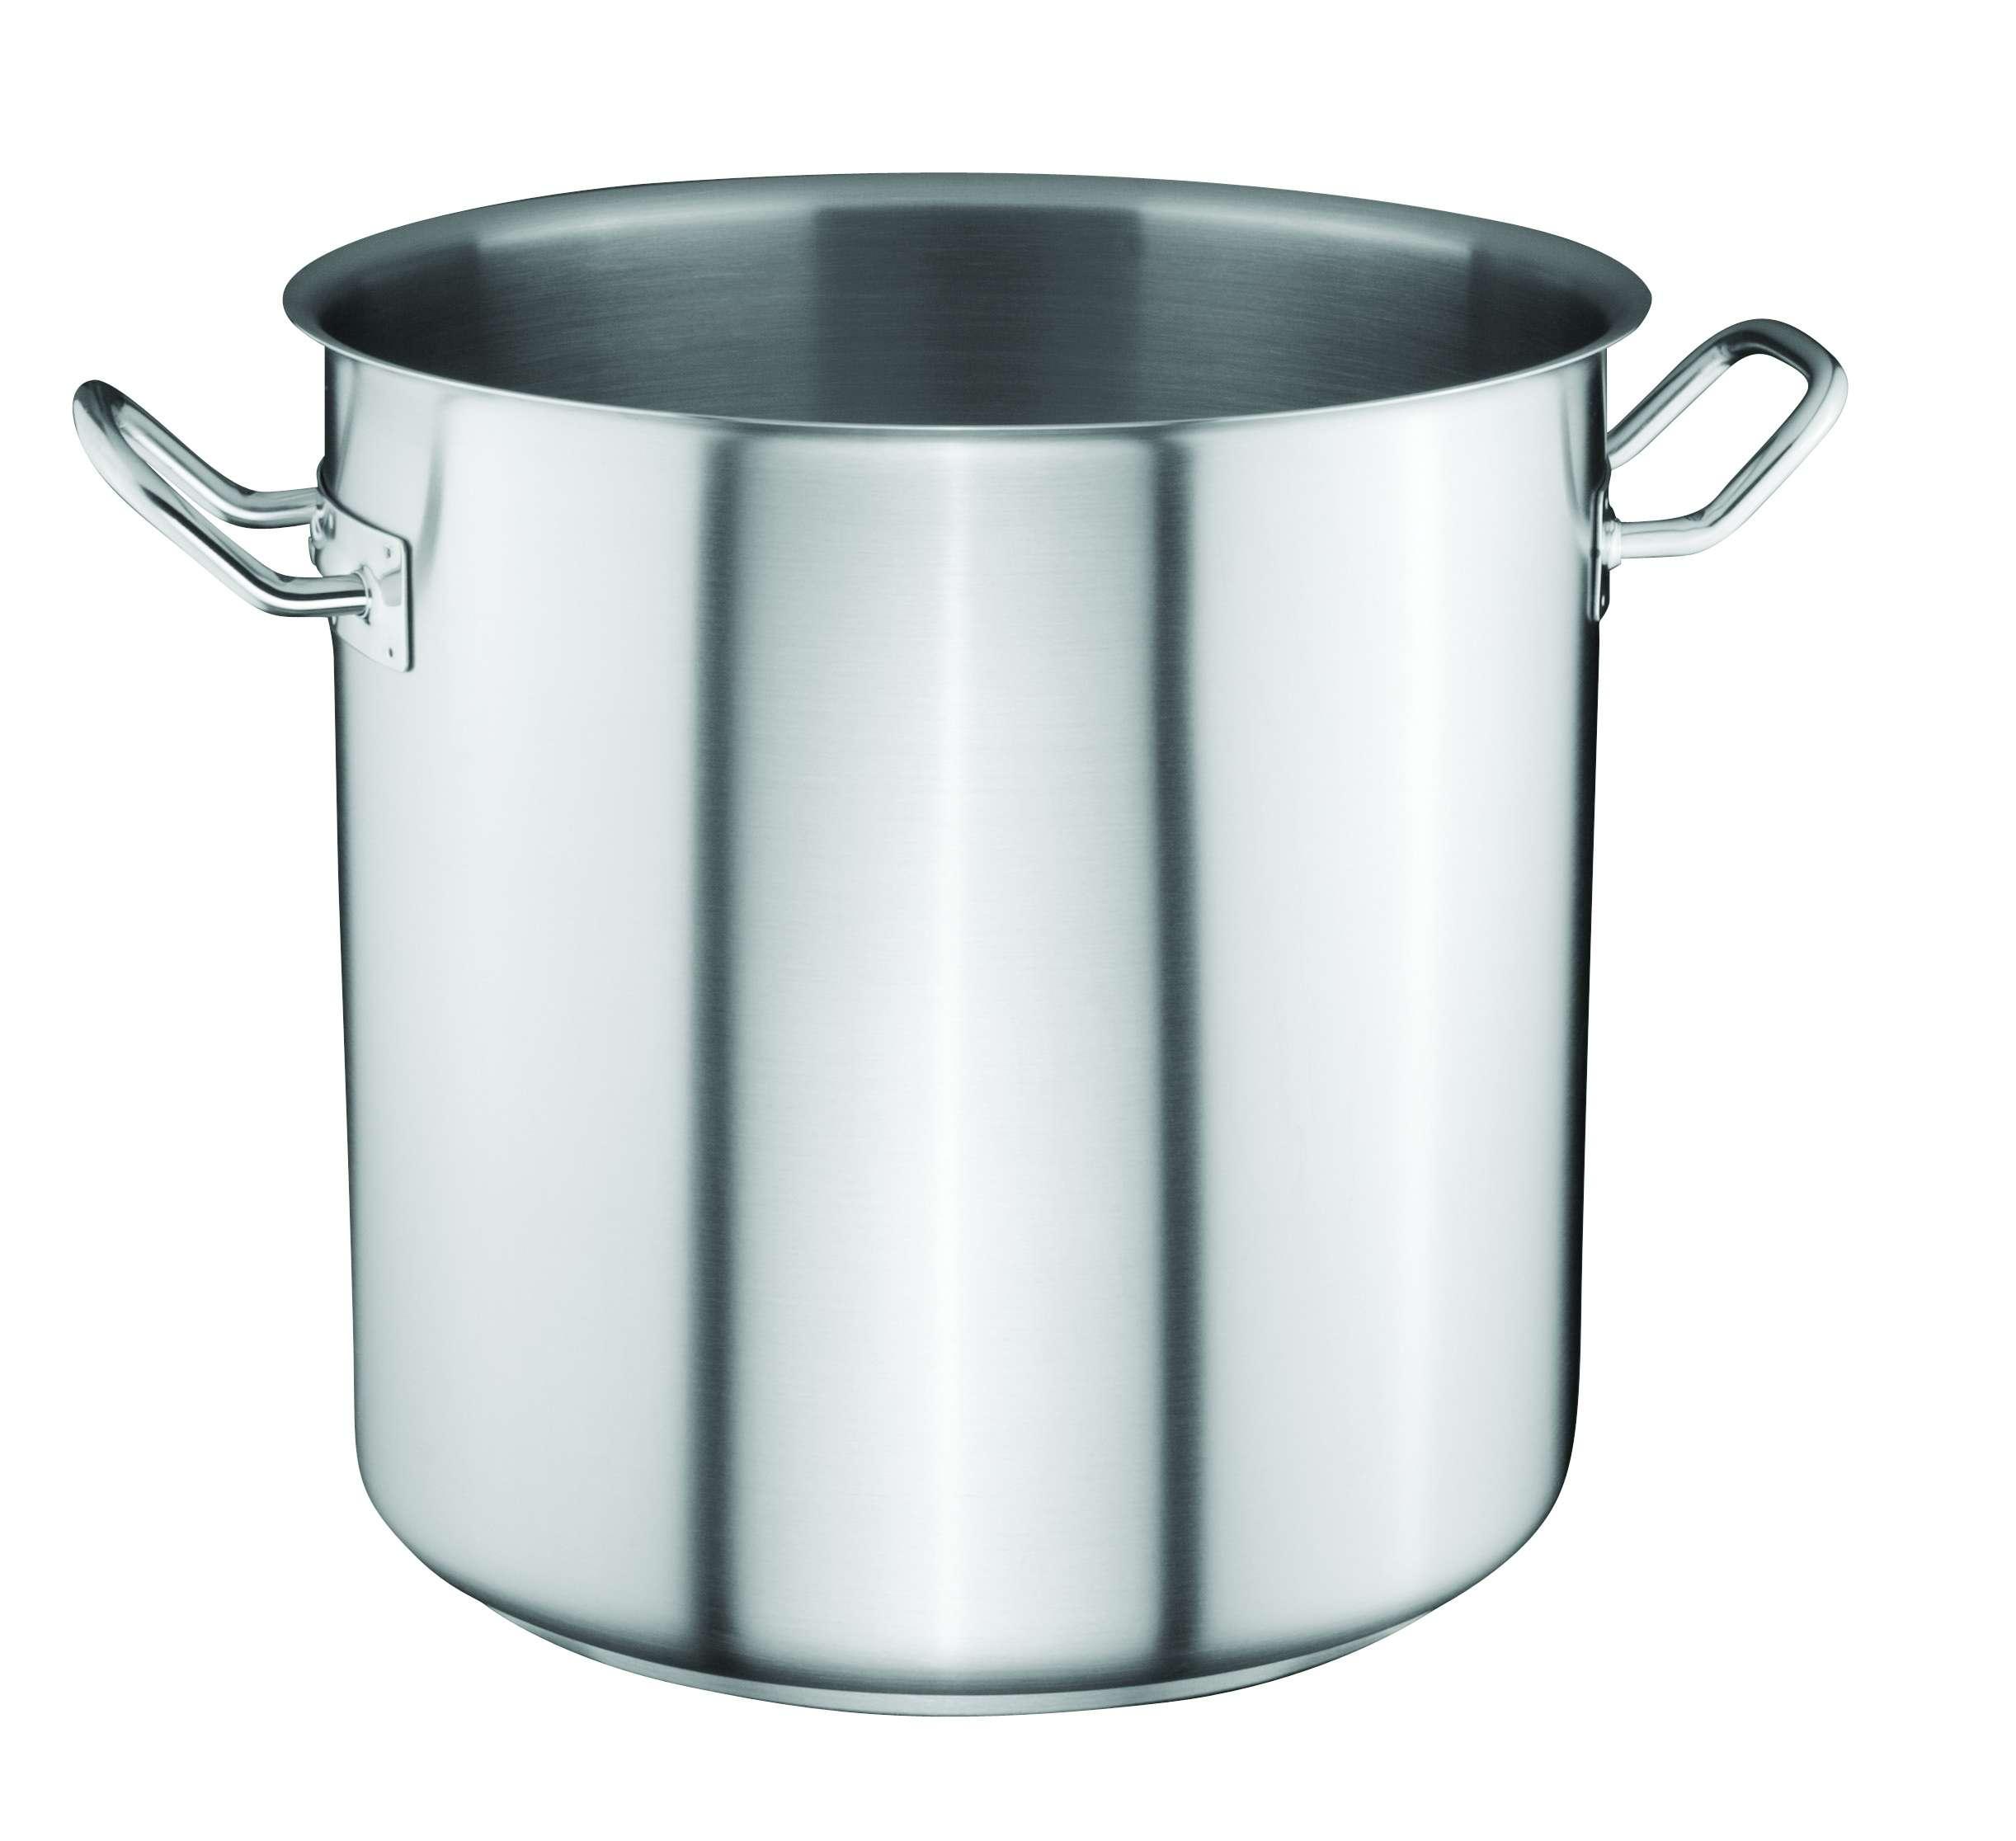 Ozti Stainless Steel Stock Pot 24 cm x 20 cm Silver Stainless Steel